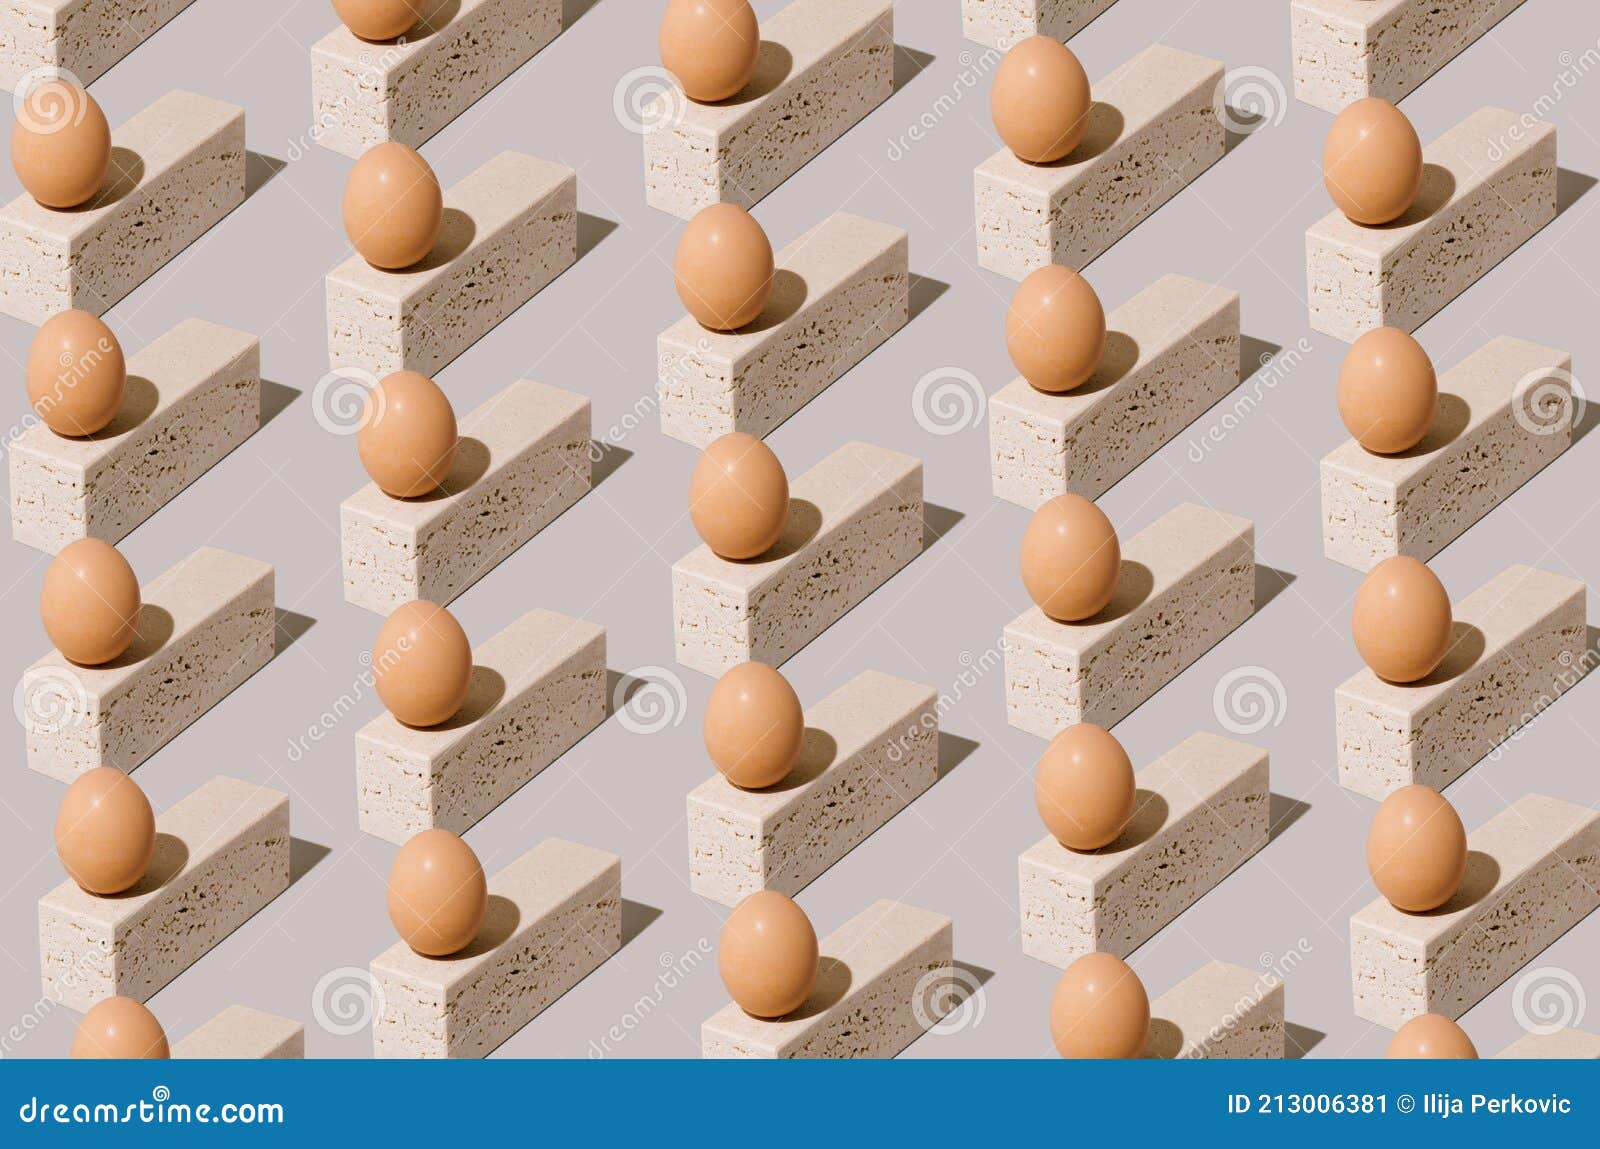 Easter egg pattern made of natural eggs on top of travertine marble blocks on a gray background. 2021 unique still life concept. Surreal vintage food composition